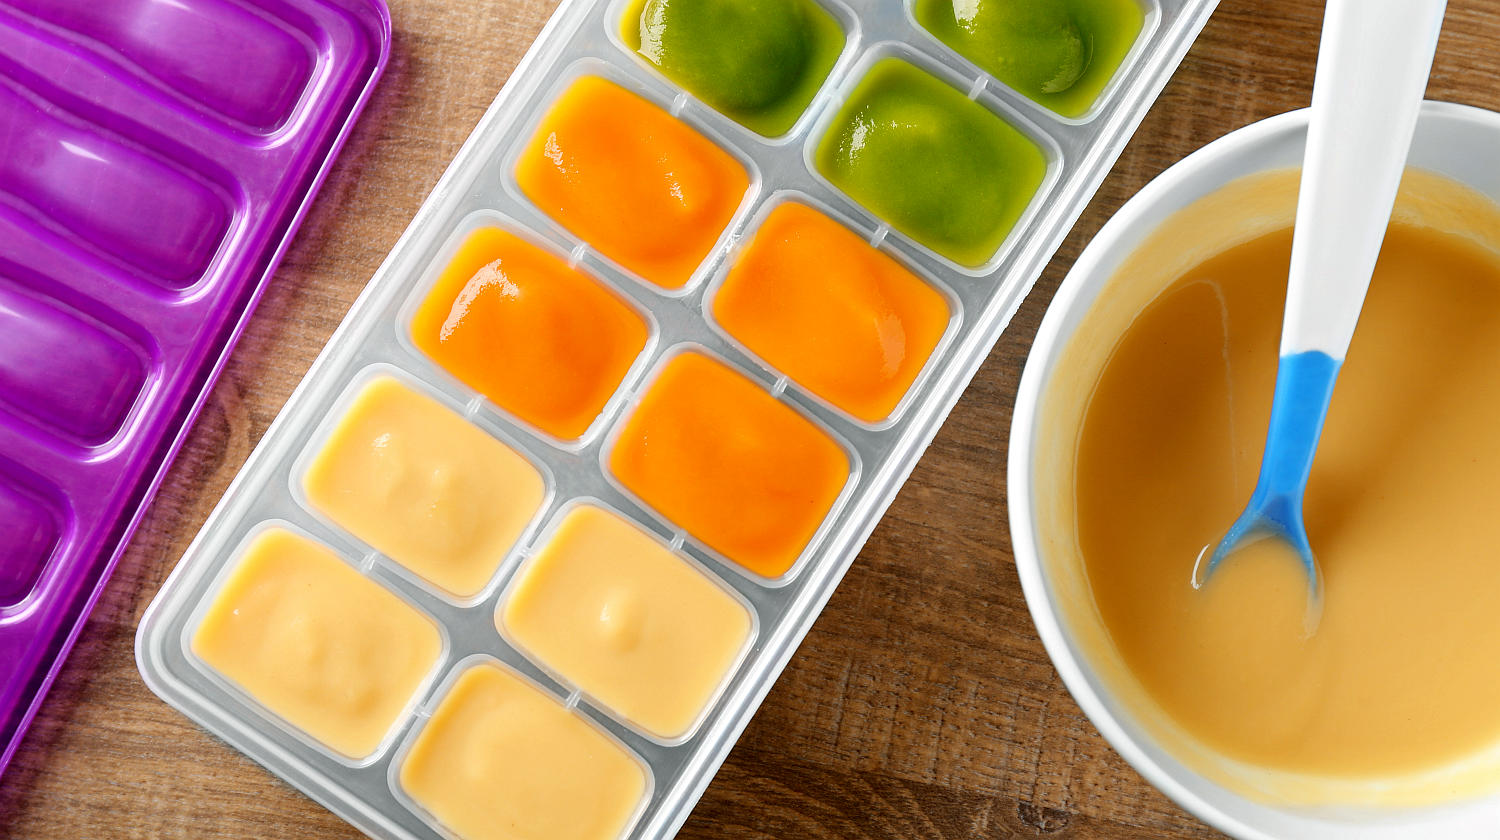 https://www.tyentusa.com/blog/wp-content/uploads/2018/12/Container-bowl-baby-food-on-table-ice-cube-tray-ss-FEATURE.jpg